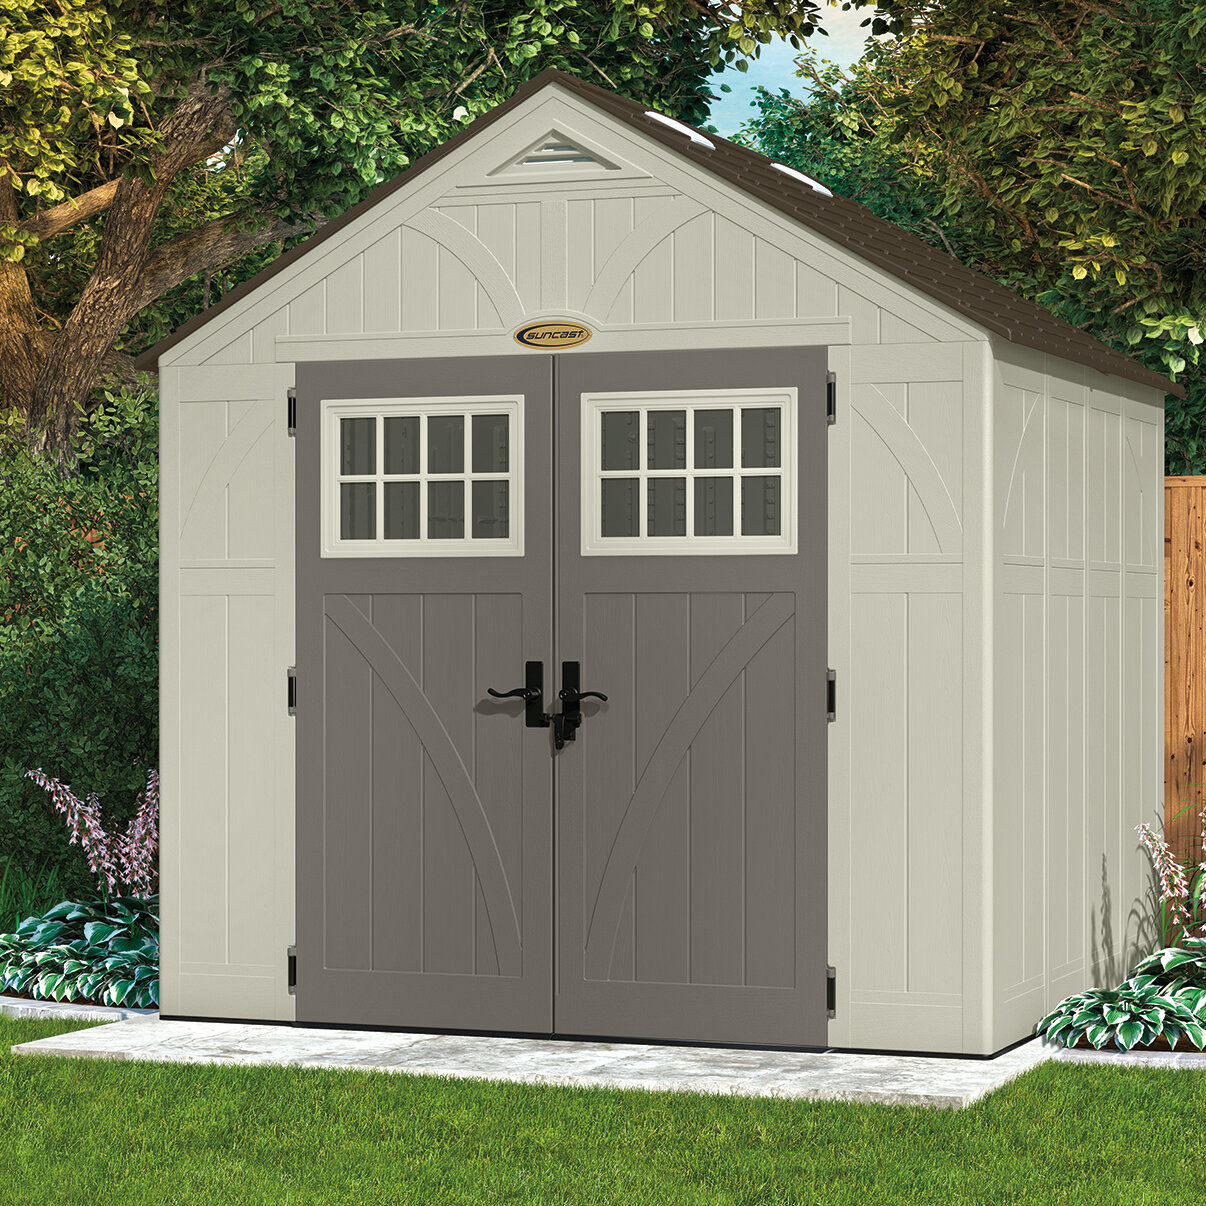 Outdoor Storage for Backyard Tools and Accessories Suncast 16 x 8 Tremont Storage Shed Transom Windows and Shingle Style Roof All-Weather Resin Material